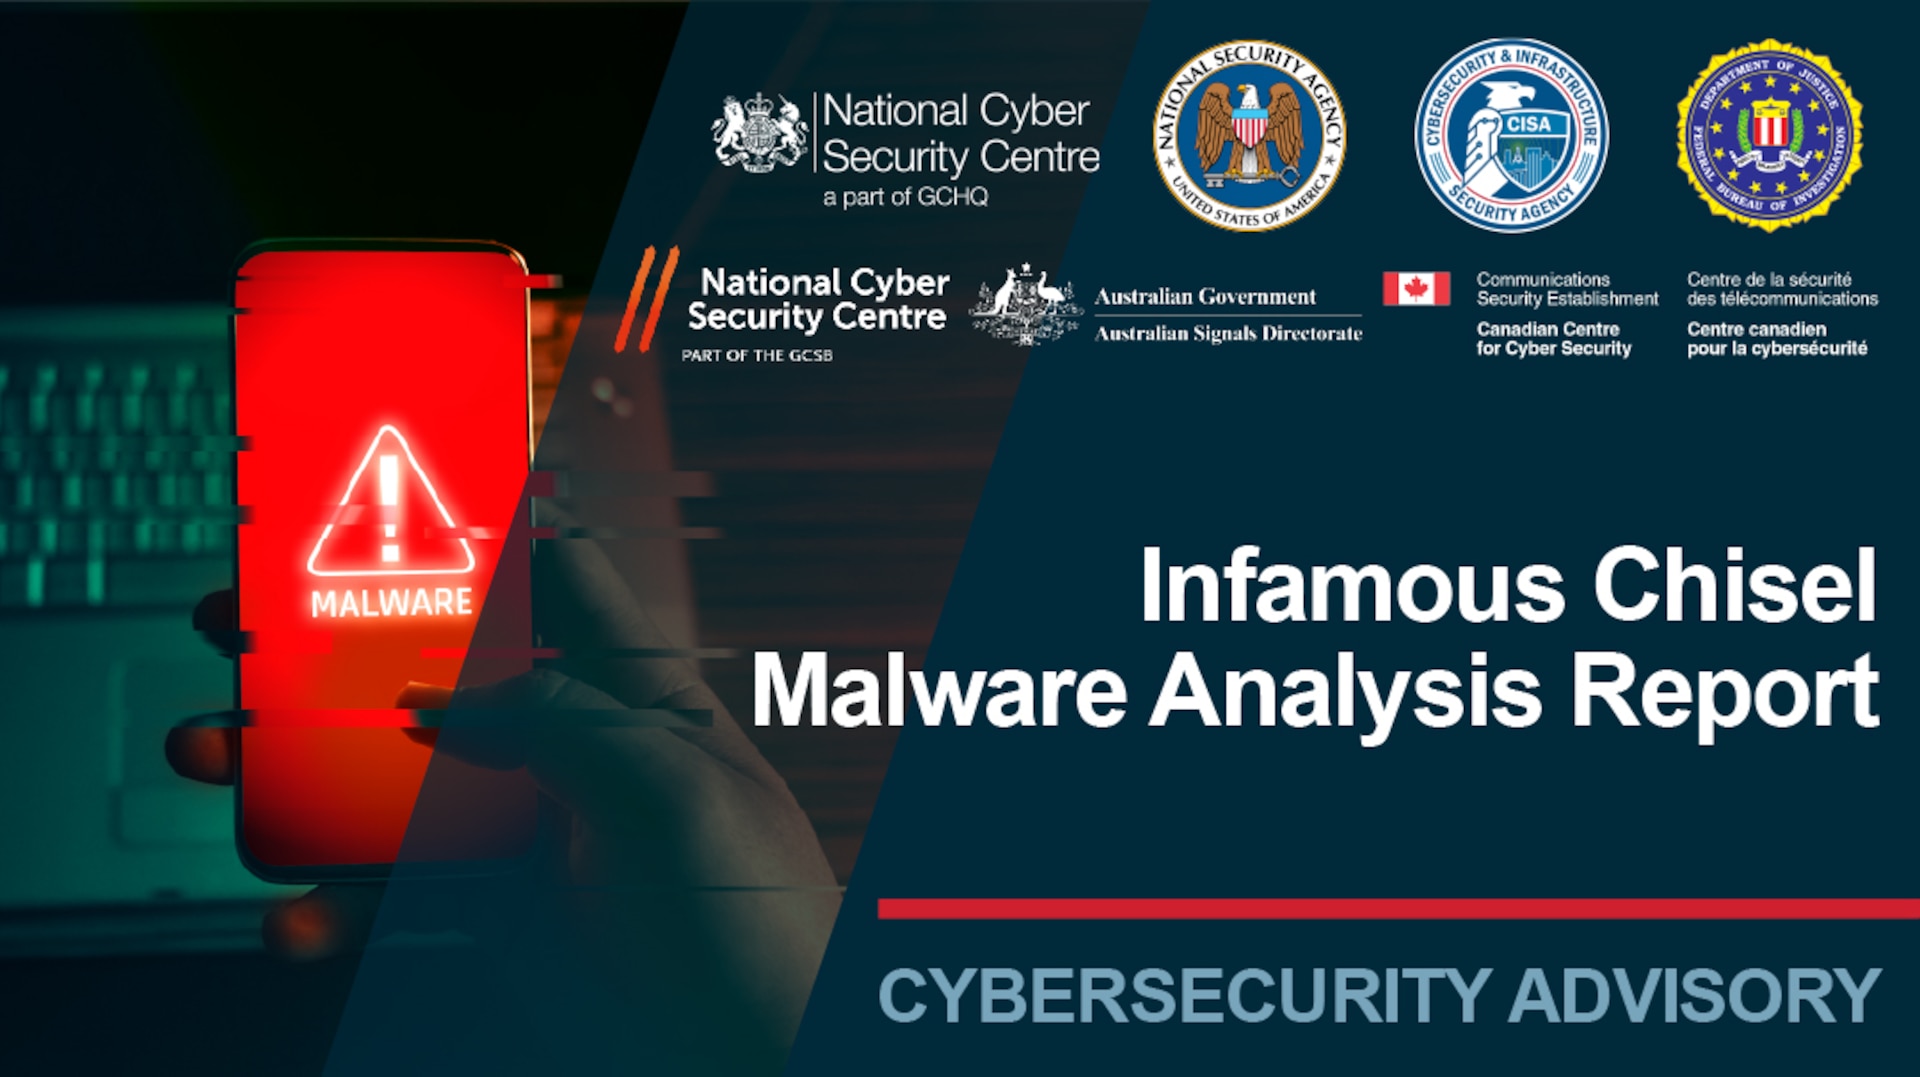 Infamous Chisel Malware Analysis Report. Cybersecurity Advisory